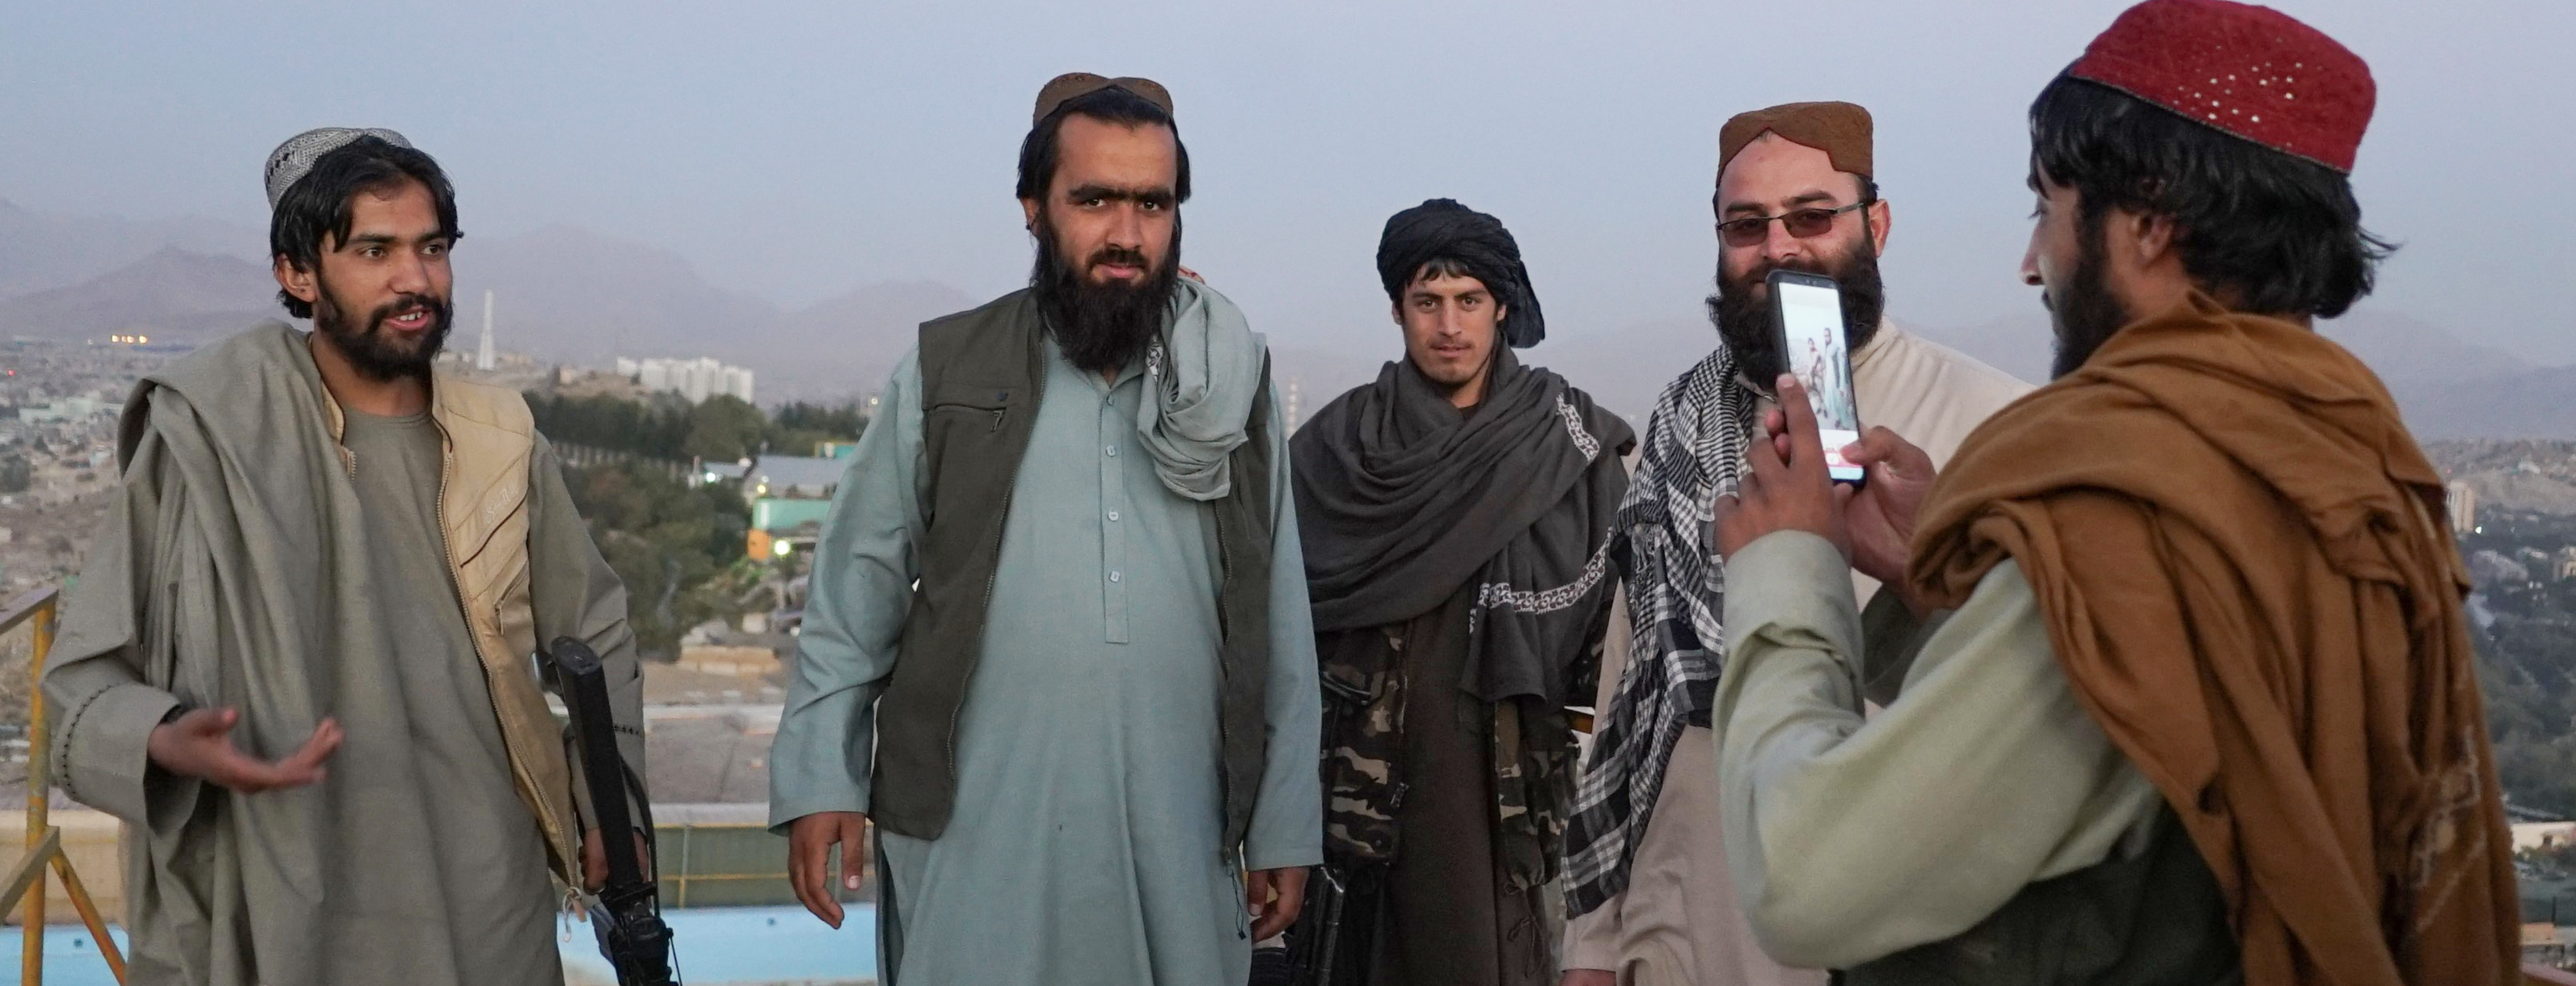 Taliban resumes practice of publicly displaying execution victims